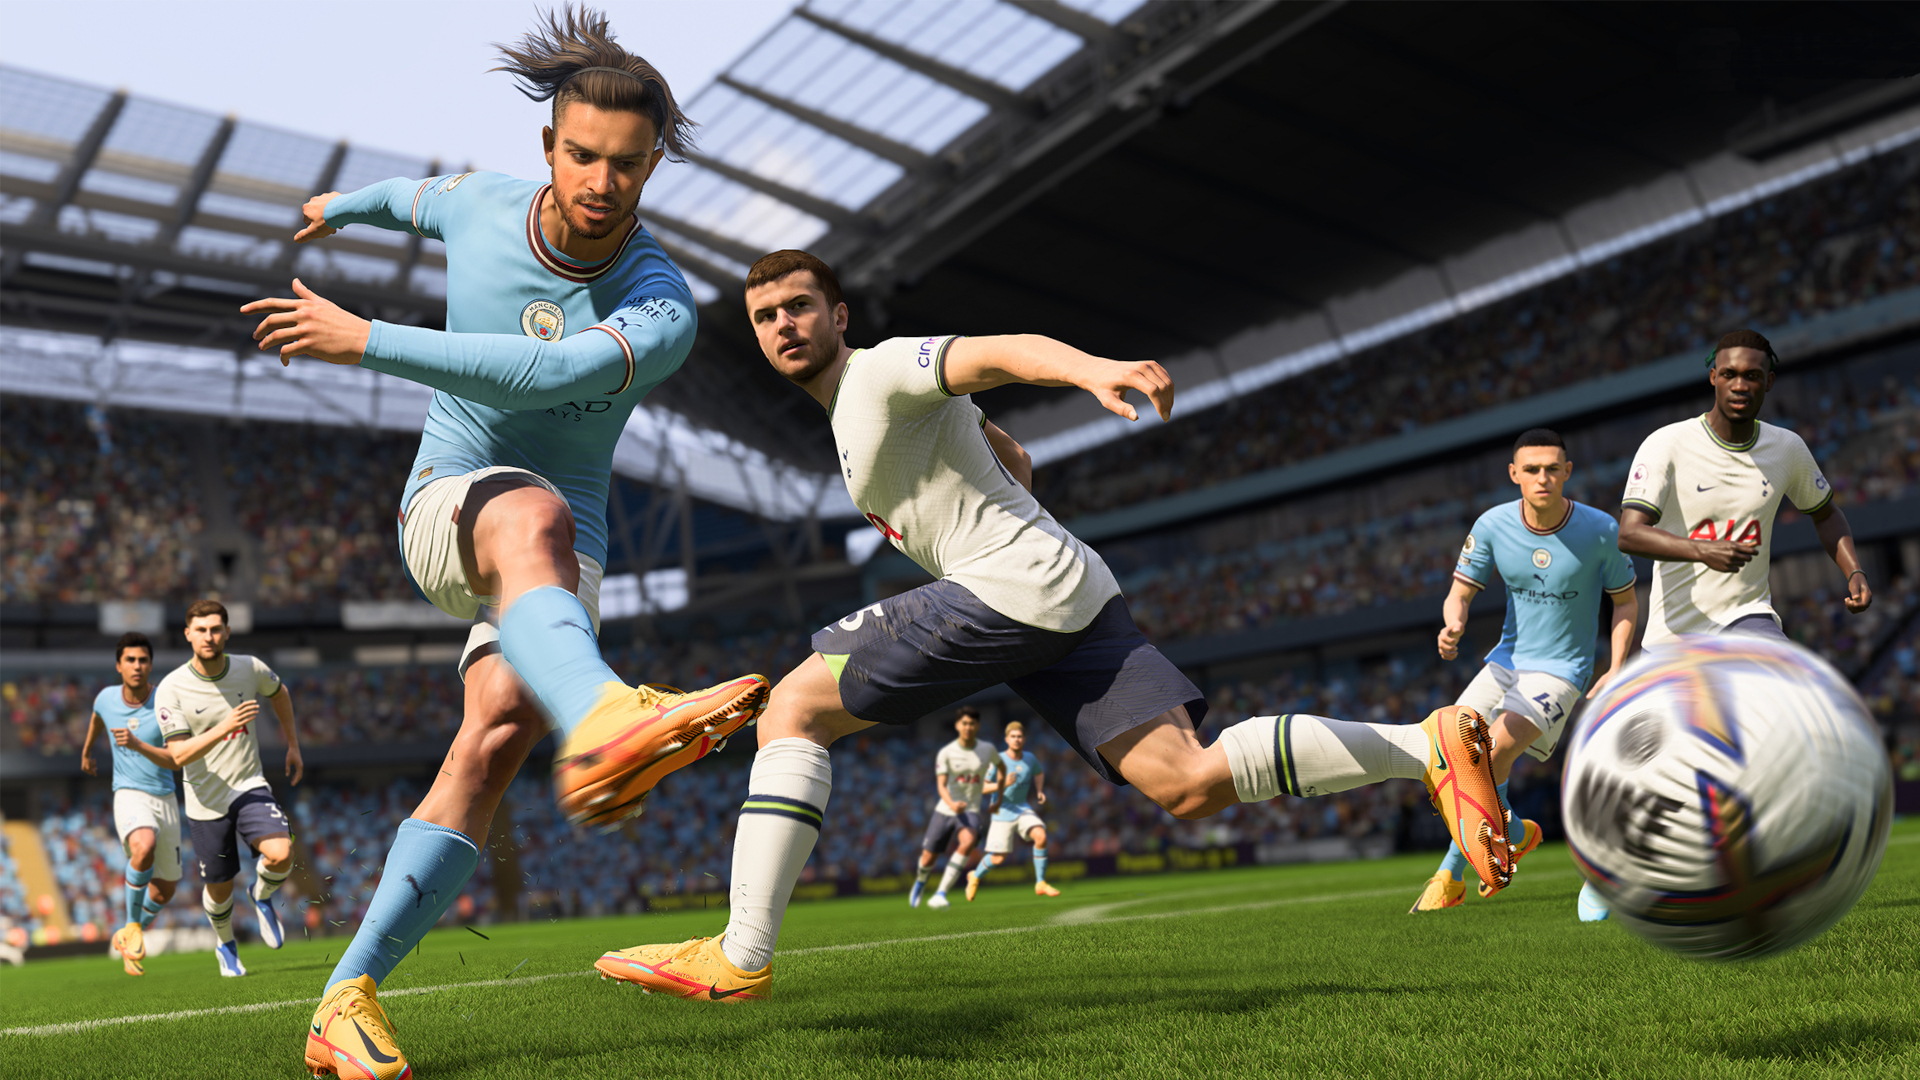 EA Sports FC: Pro Clubs set for cross-play implementation